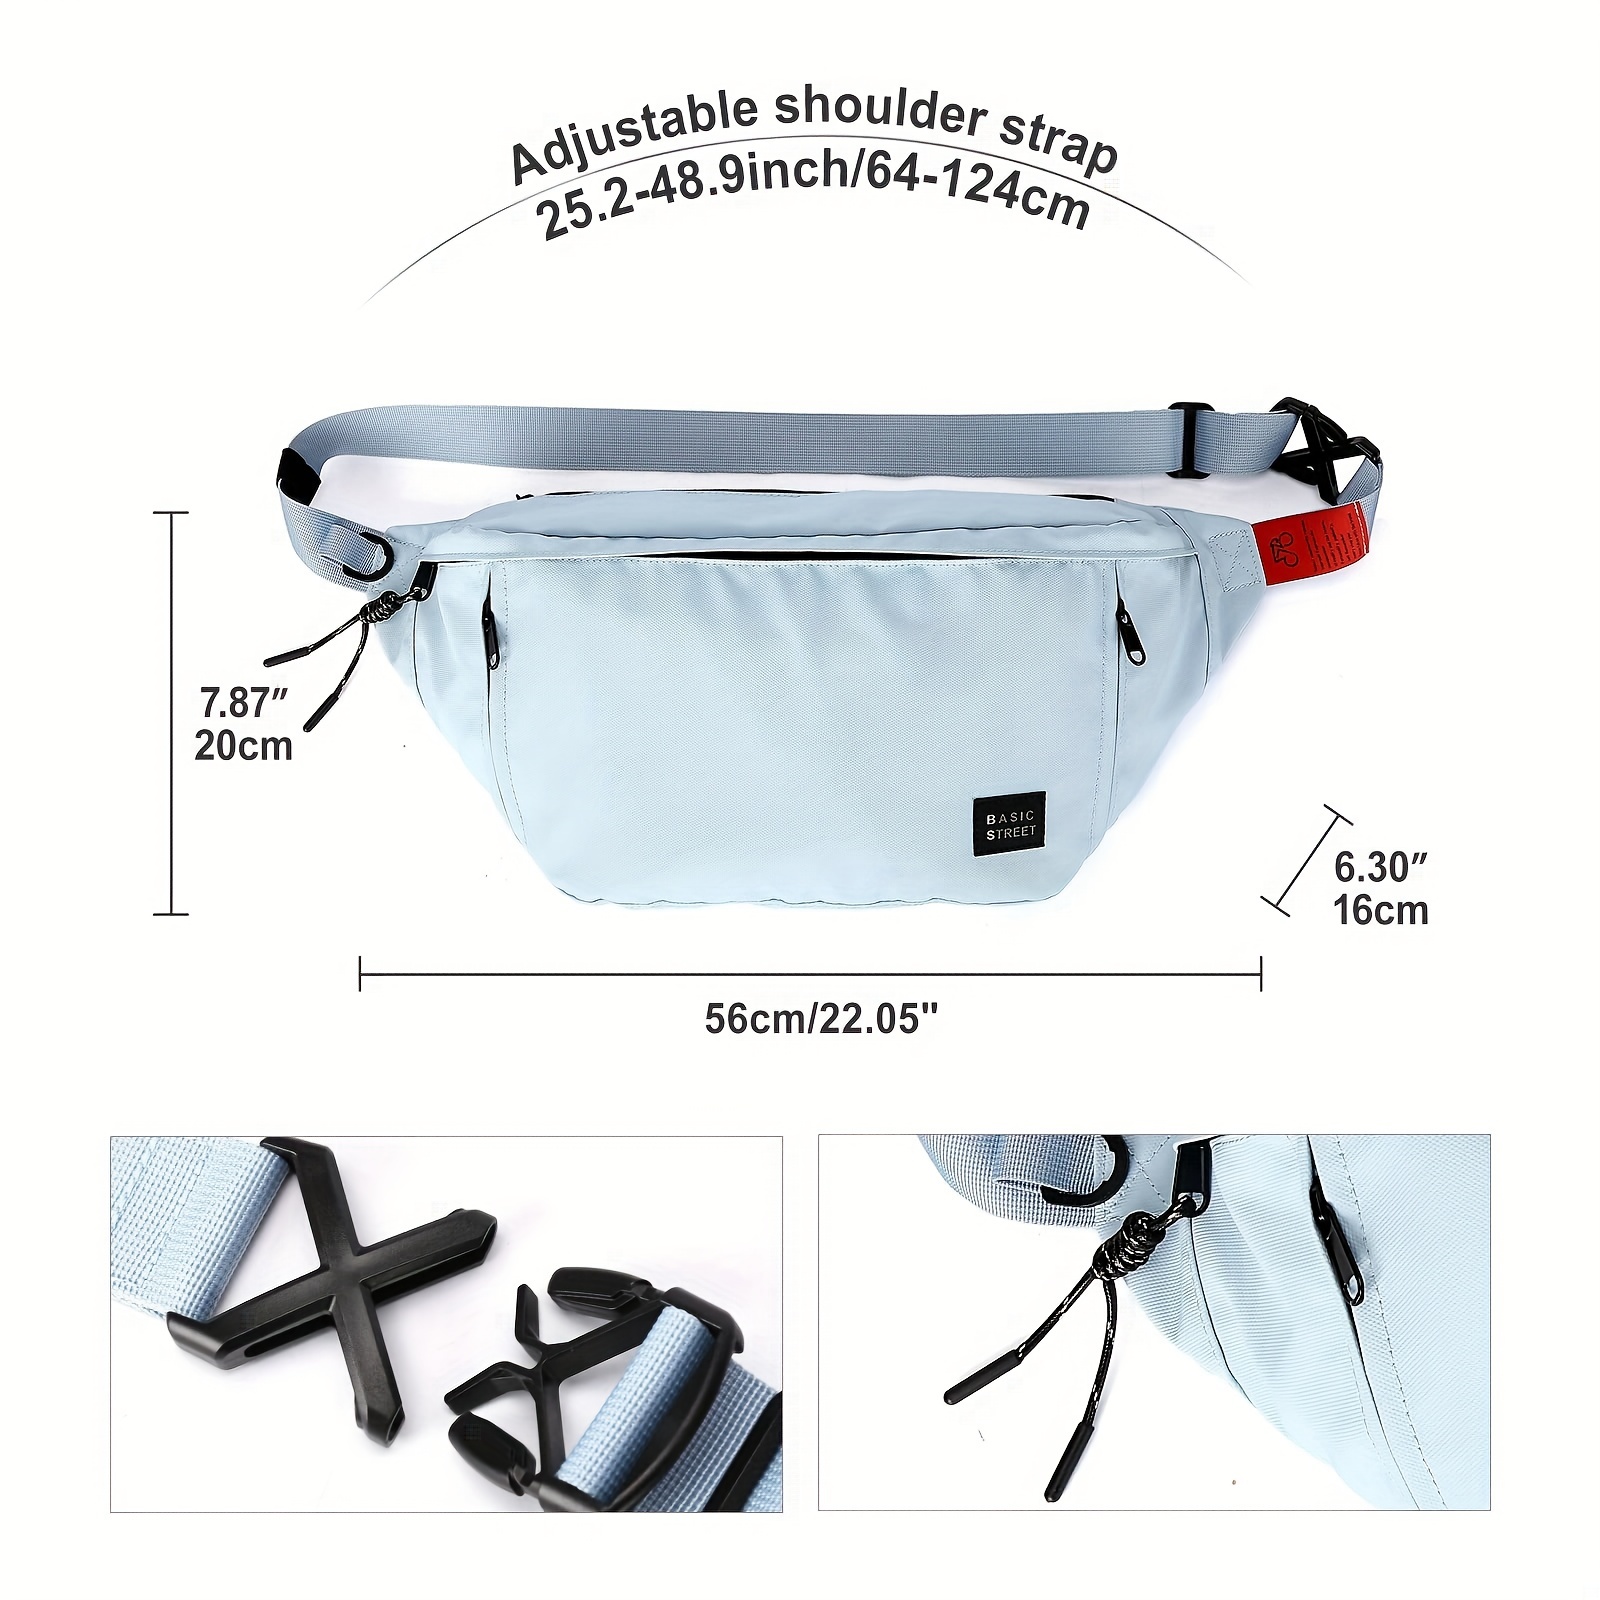 Large Fanny Pack For Women Men Waterproof Waist Bag Pack With